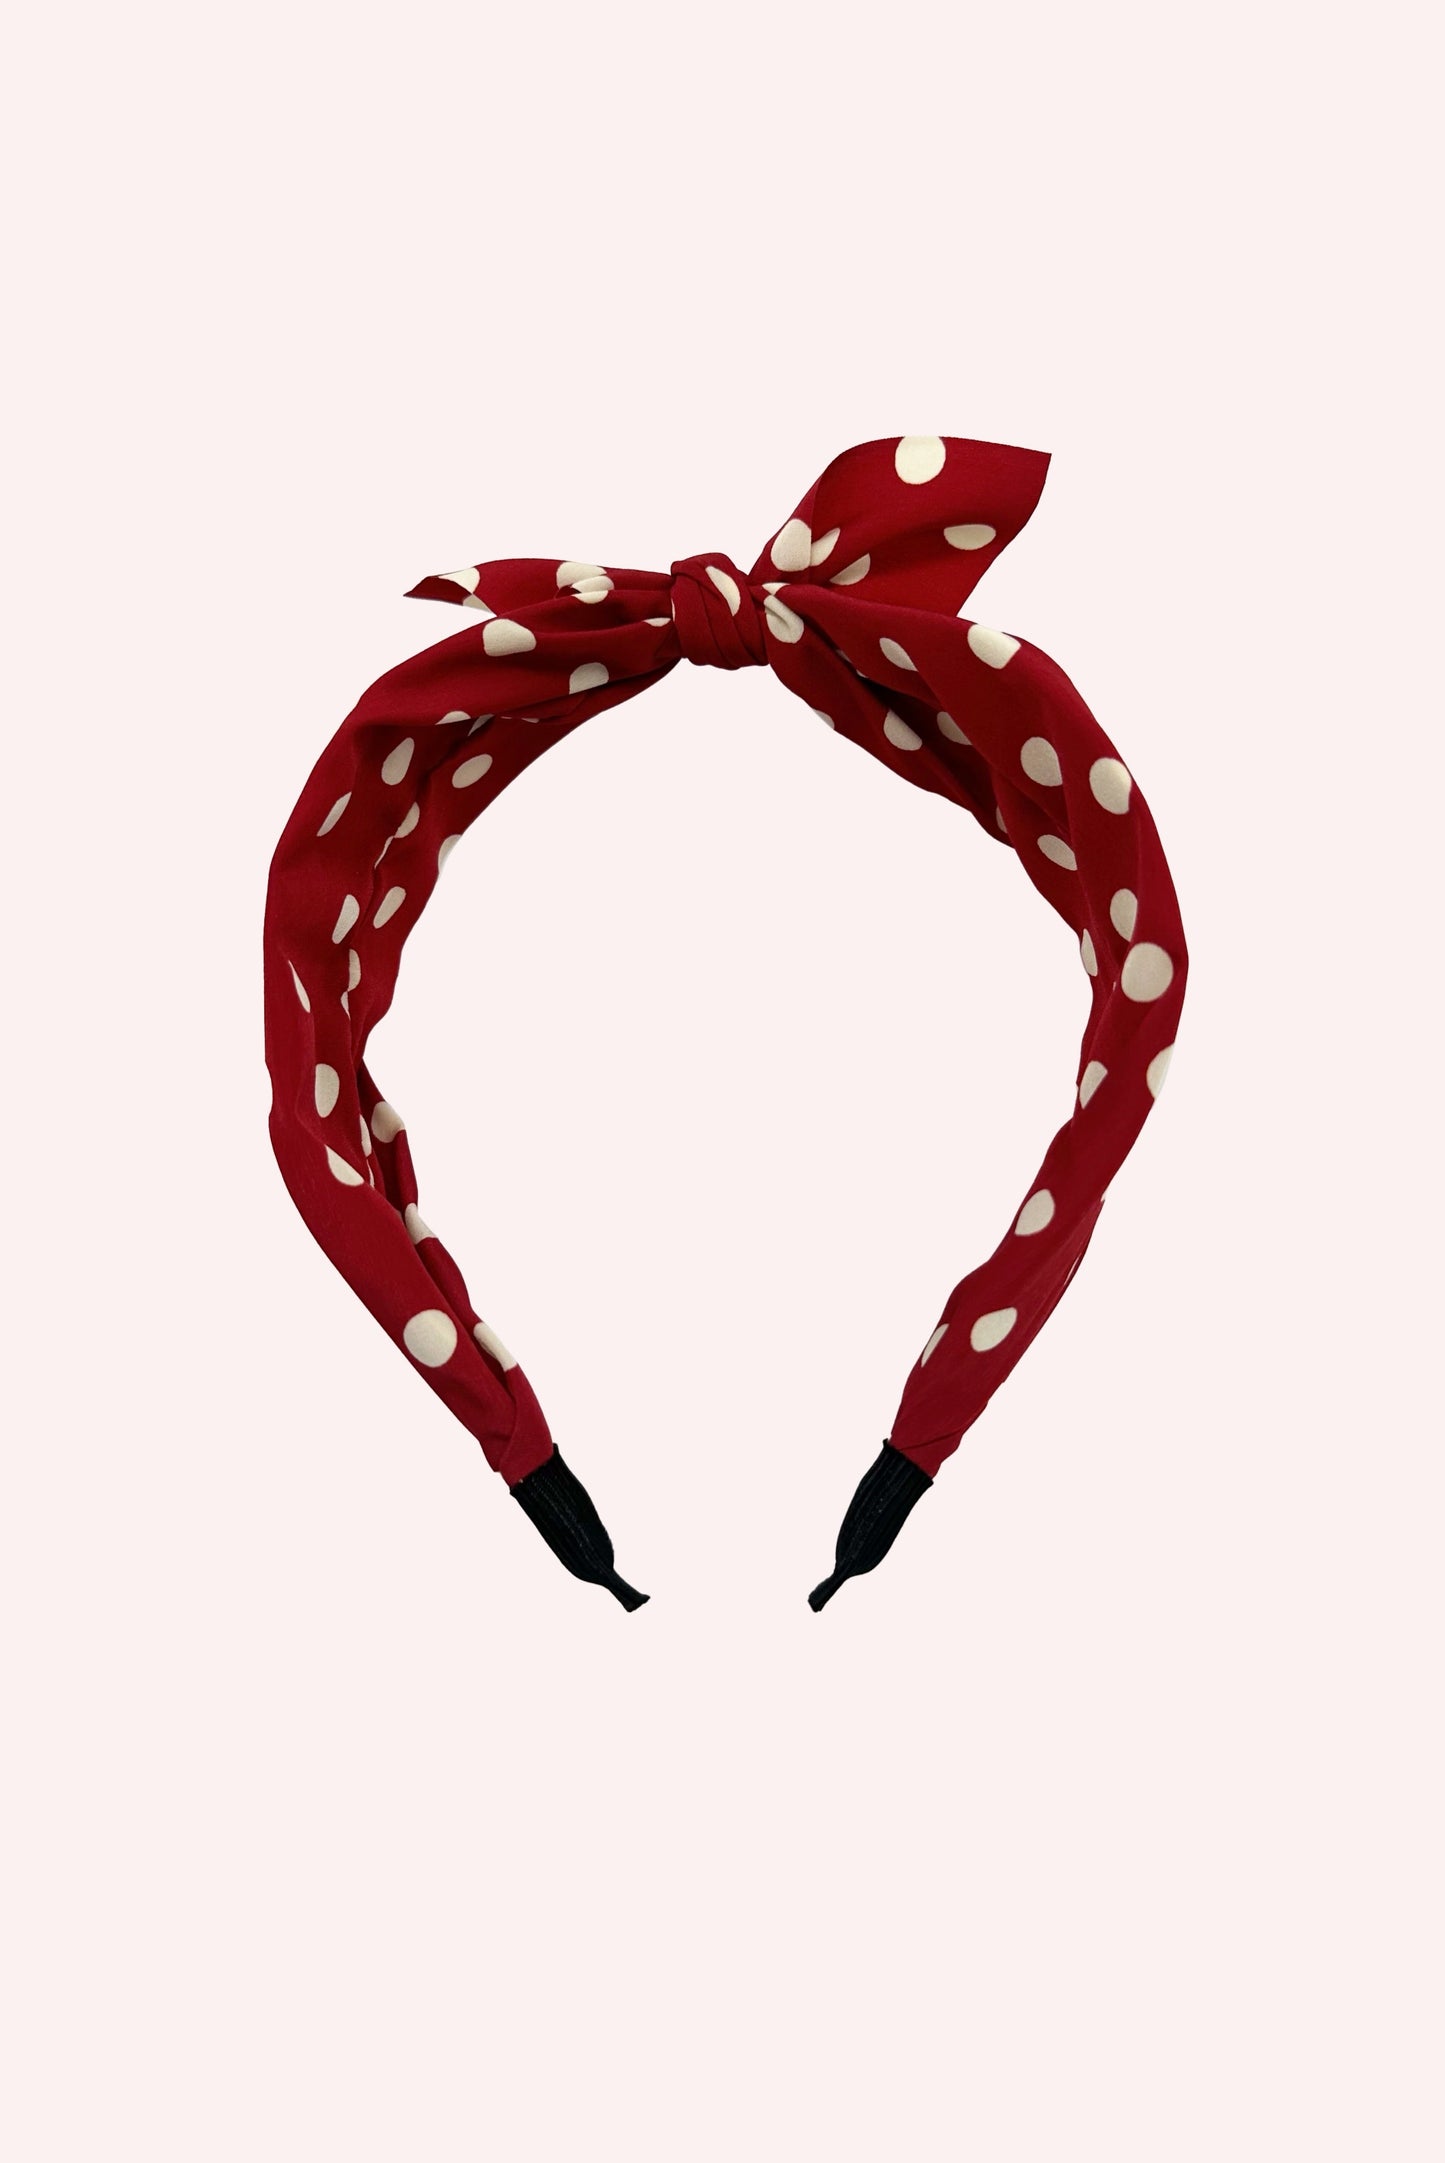 The Isabelle Headband, red base with white dots throughout. Knot at the center of the accessory